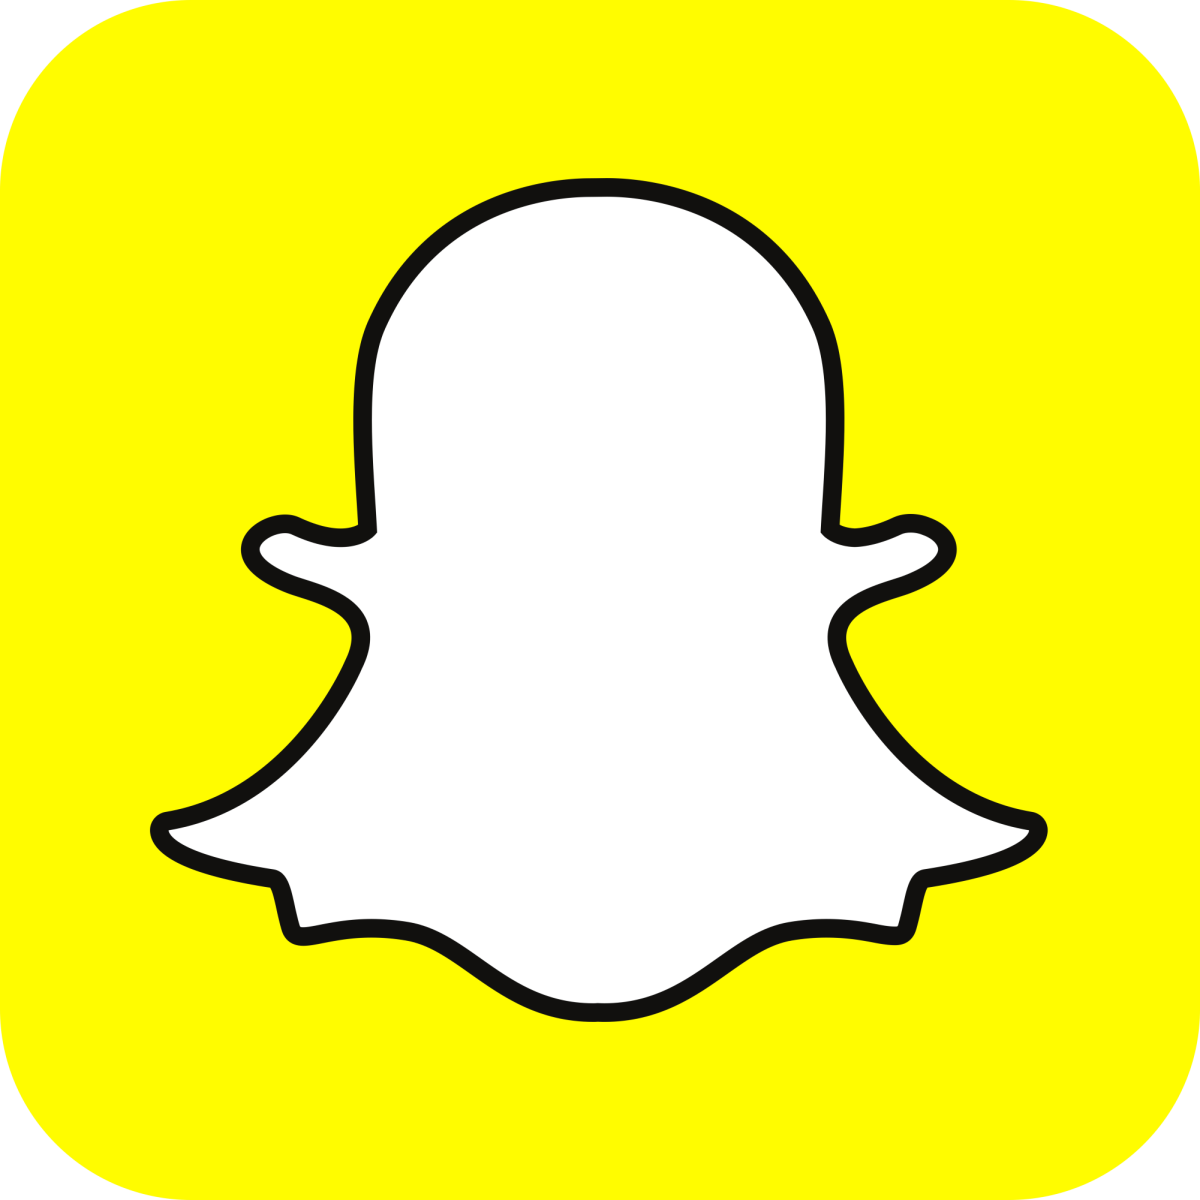 Meanness makes new Snapchat feature unusable